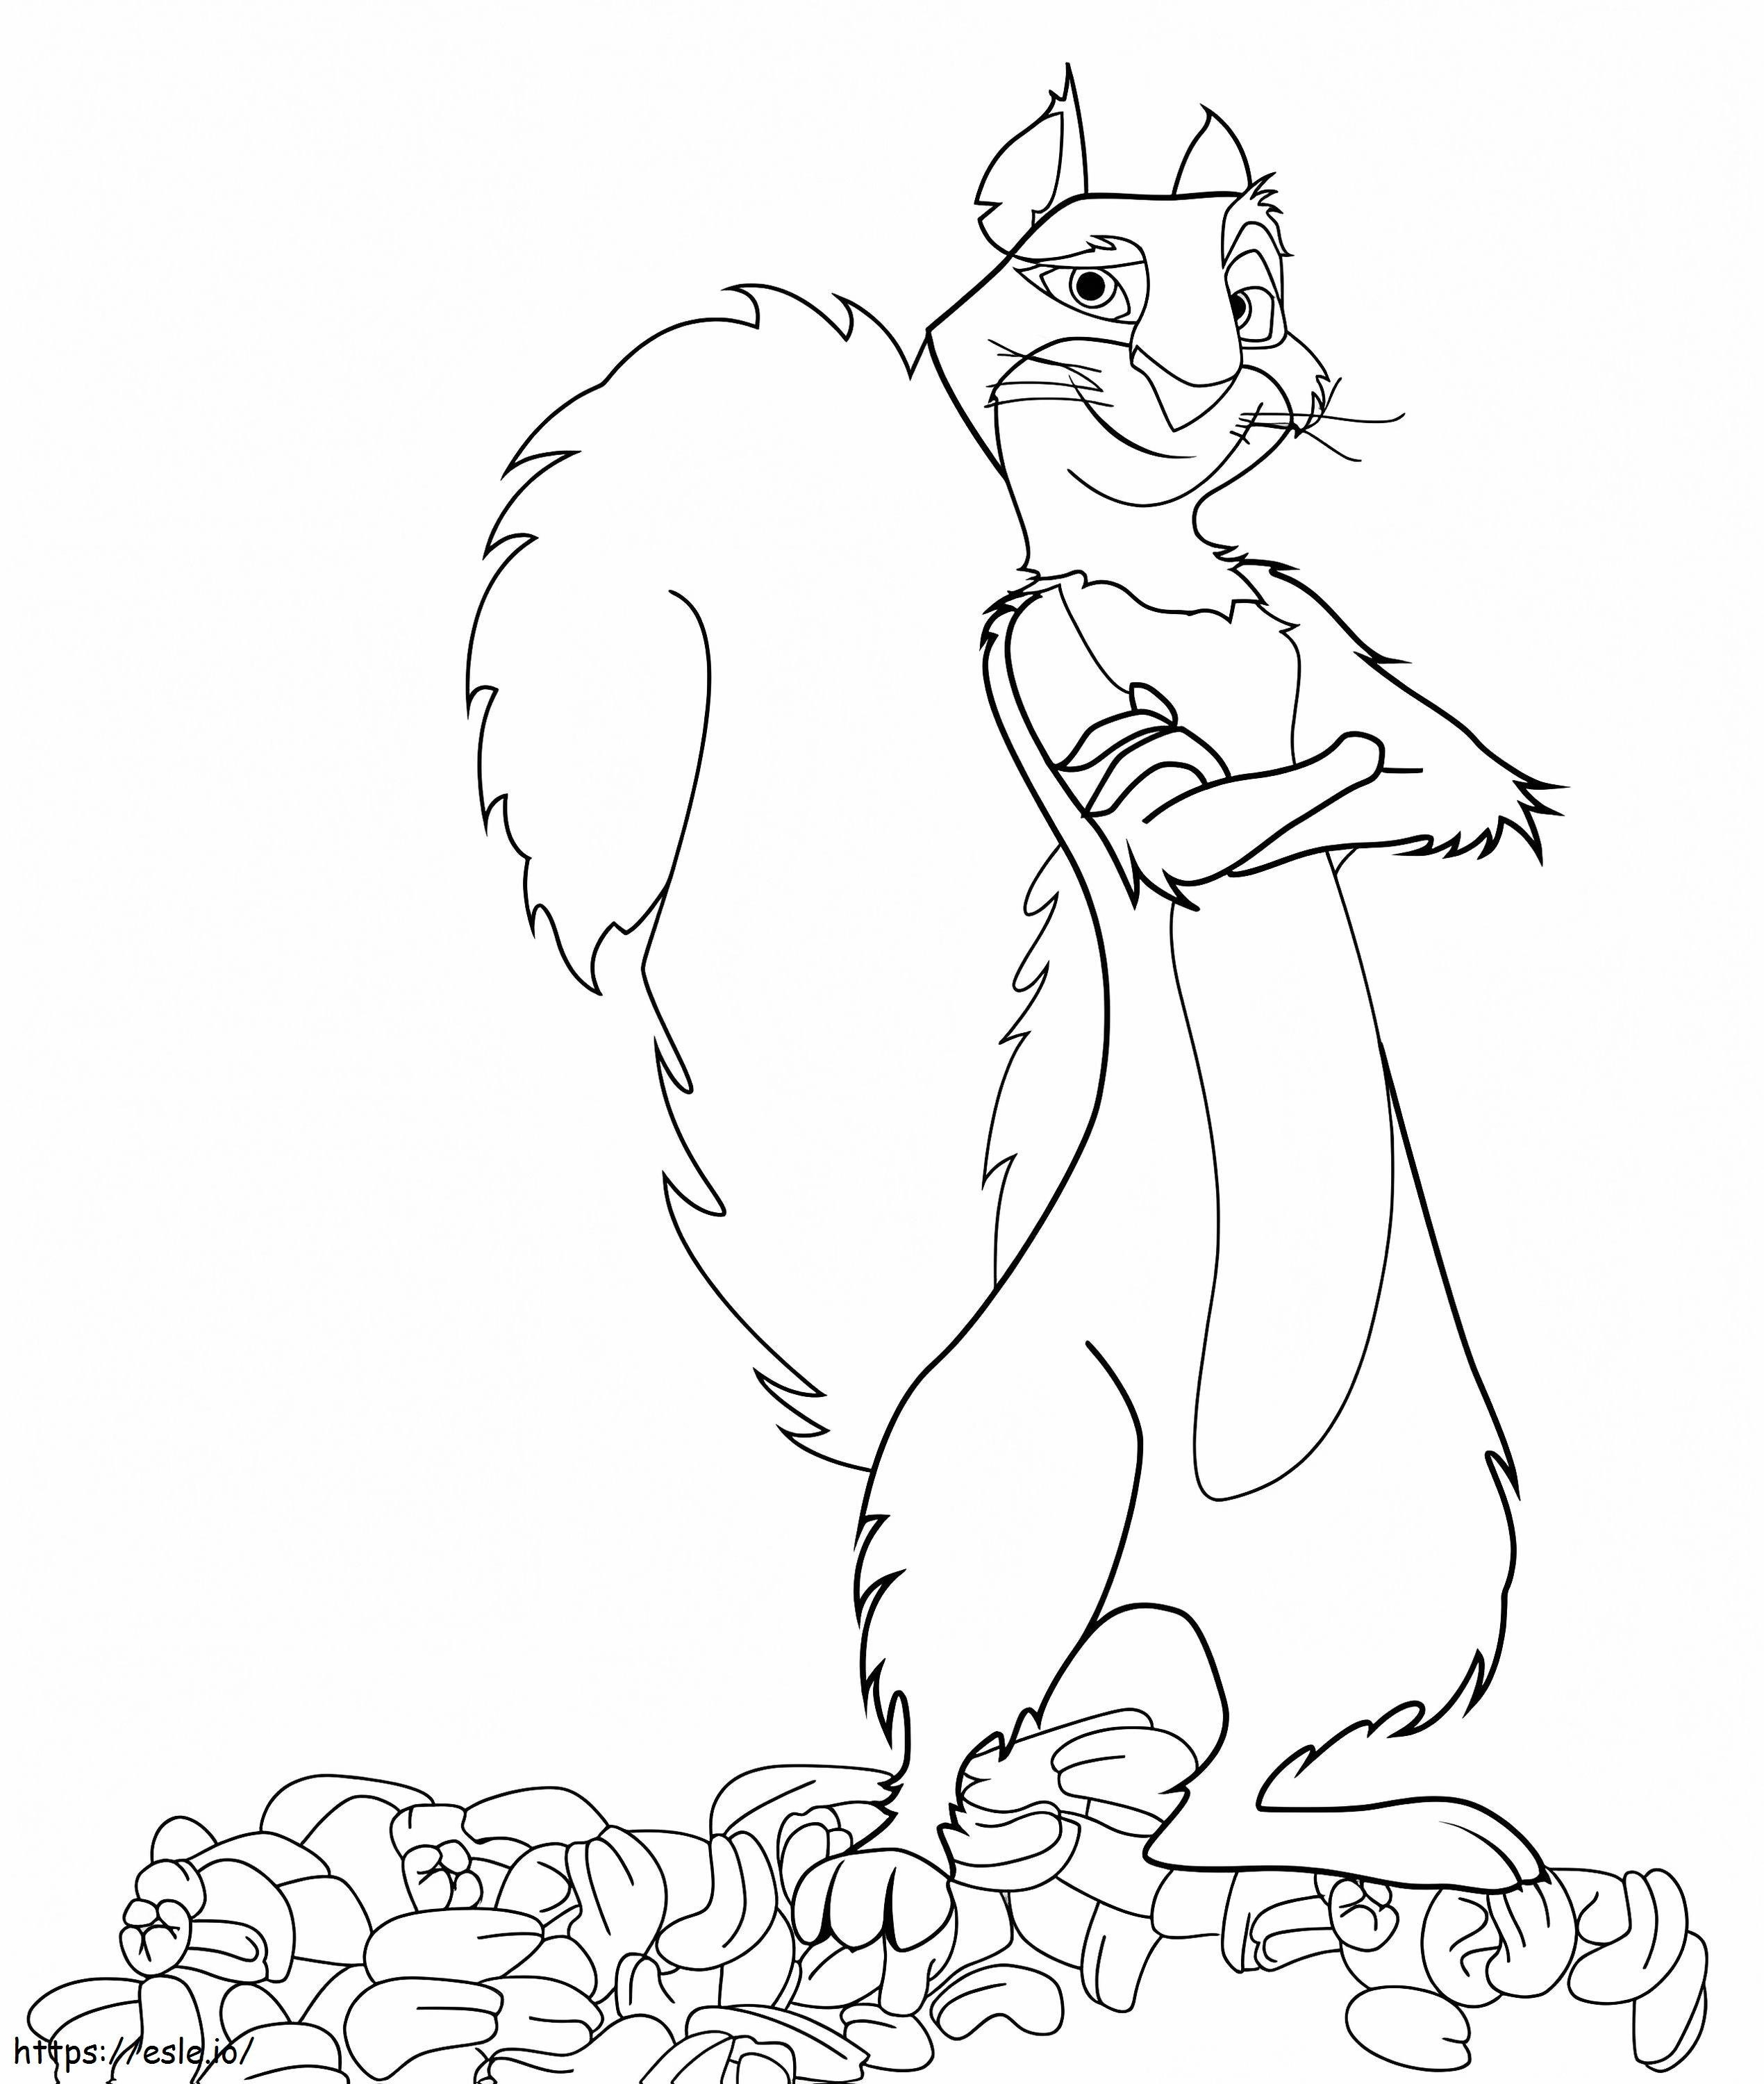 Surly Squirrel From The Nut Job coloring page